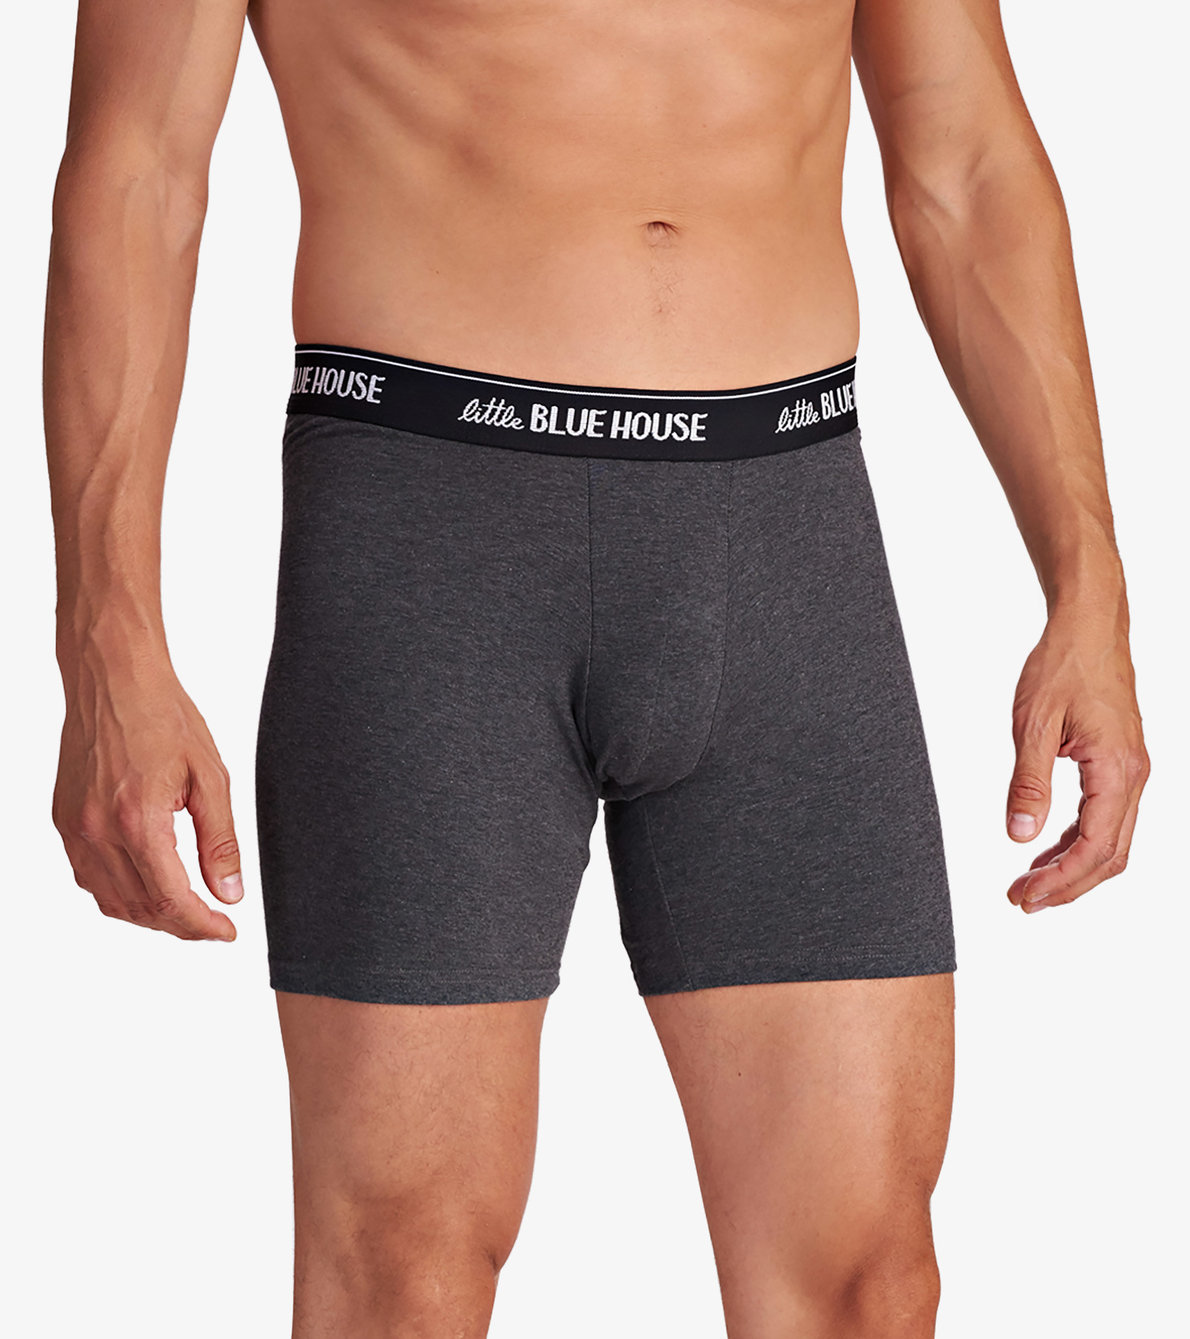 View larger image of Smart Ass Men's Glow in the Dark Boxer Briefs